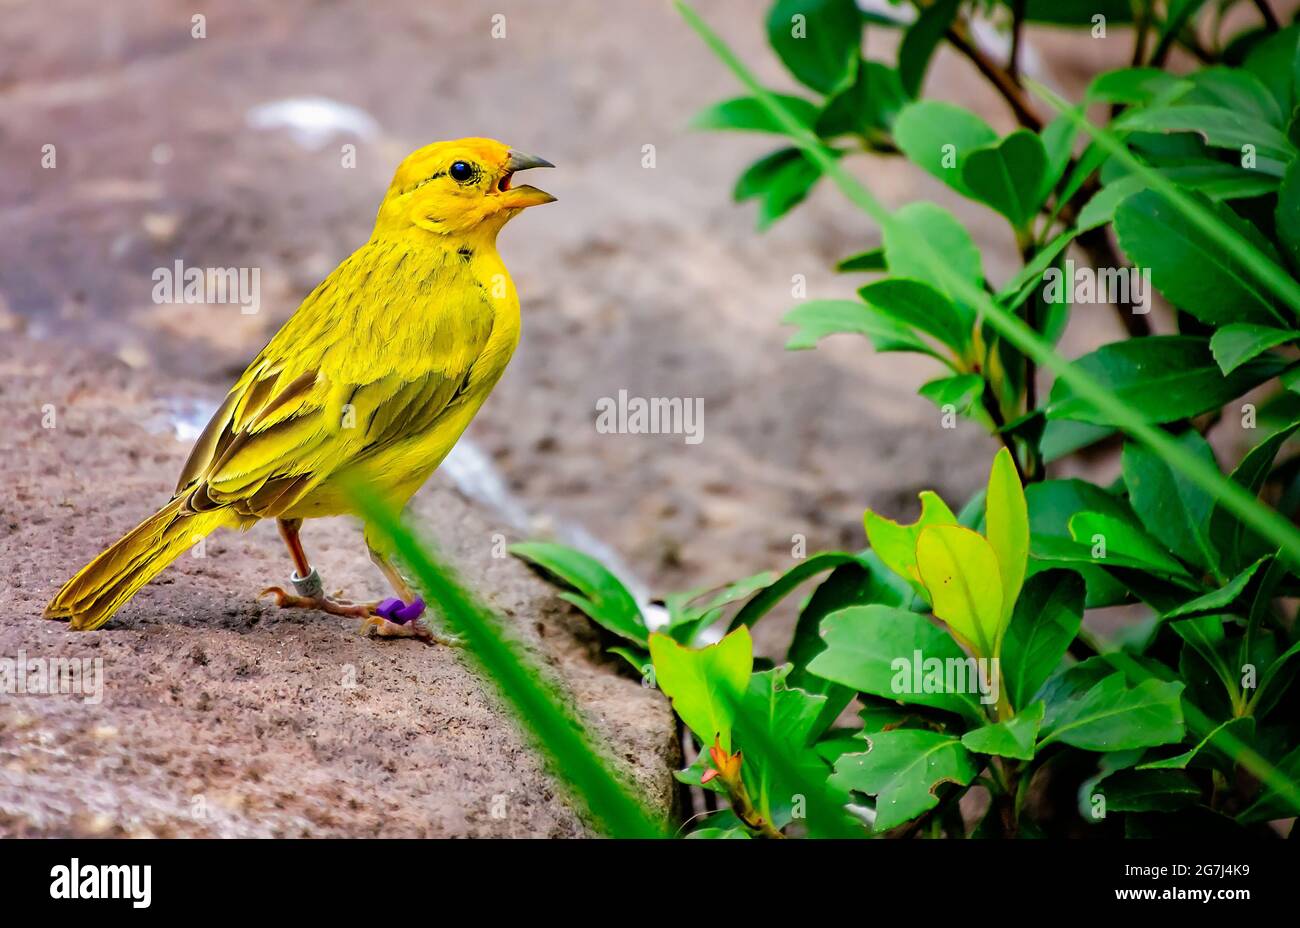 A saffron finch sings at the aviary at Mississippi Aquarium, June 24, 2021, in Gulfport, Mississippi. The saffron finch is a South American tanager. Stock Photo